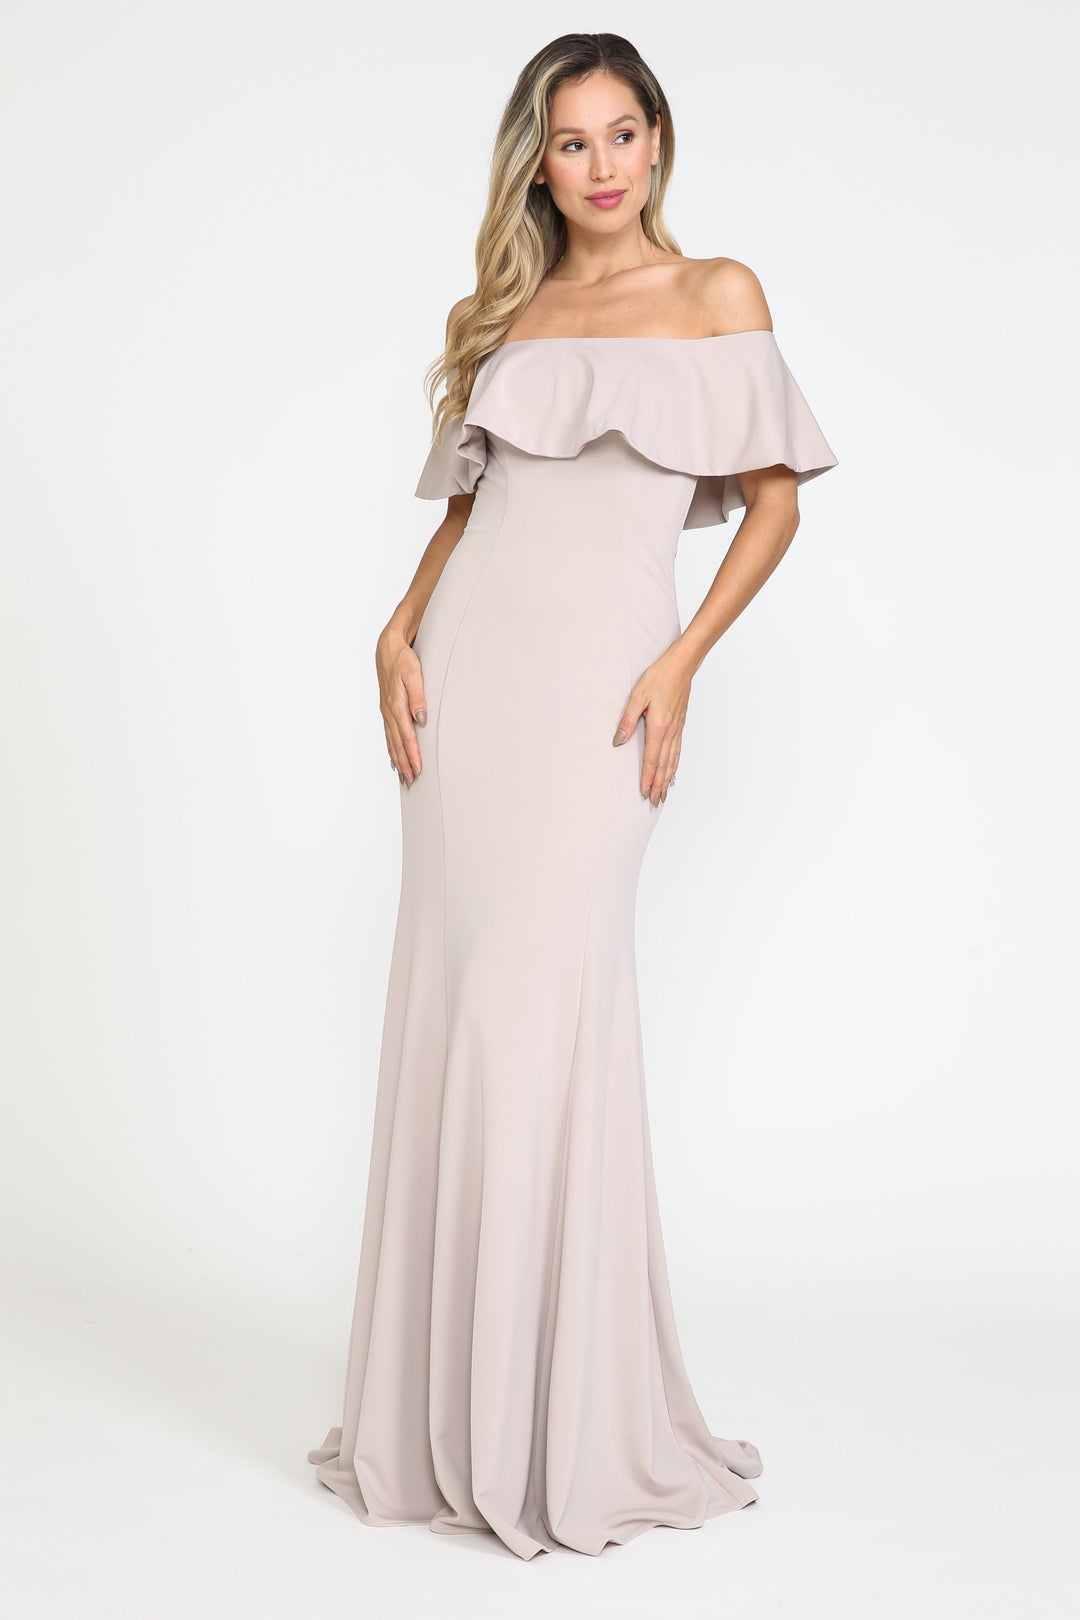 Fitted Long Ruffled Off Shoulder Dress by Poly USA 8146